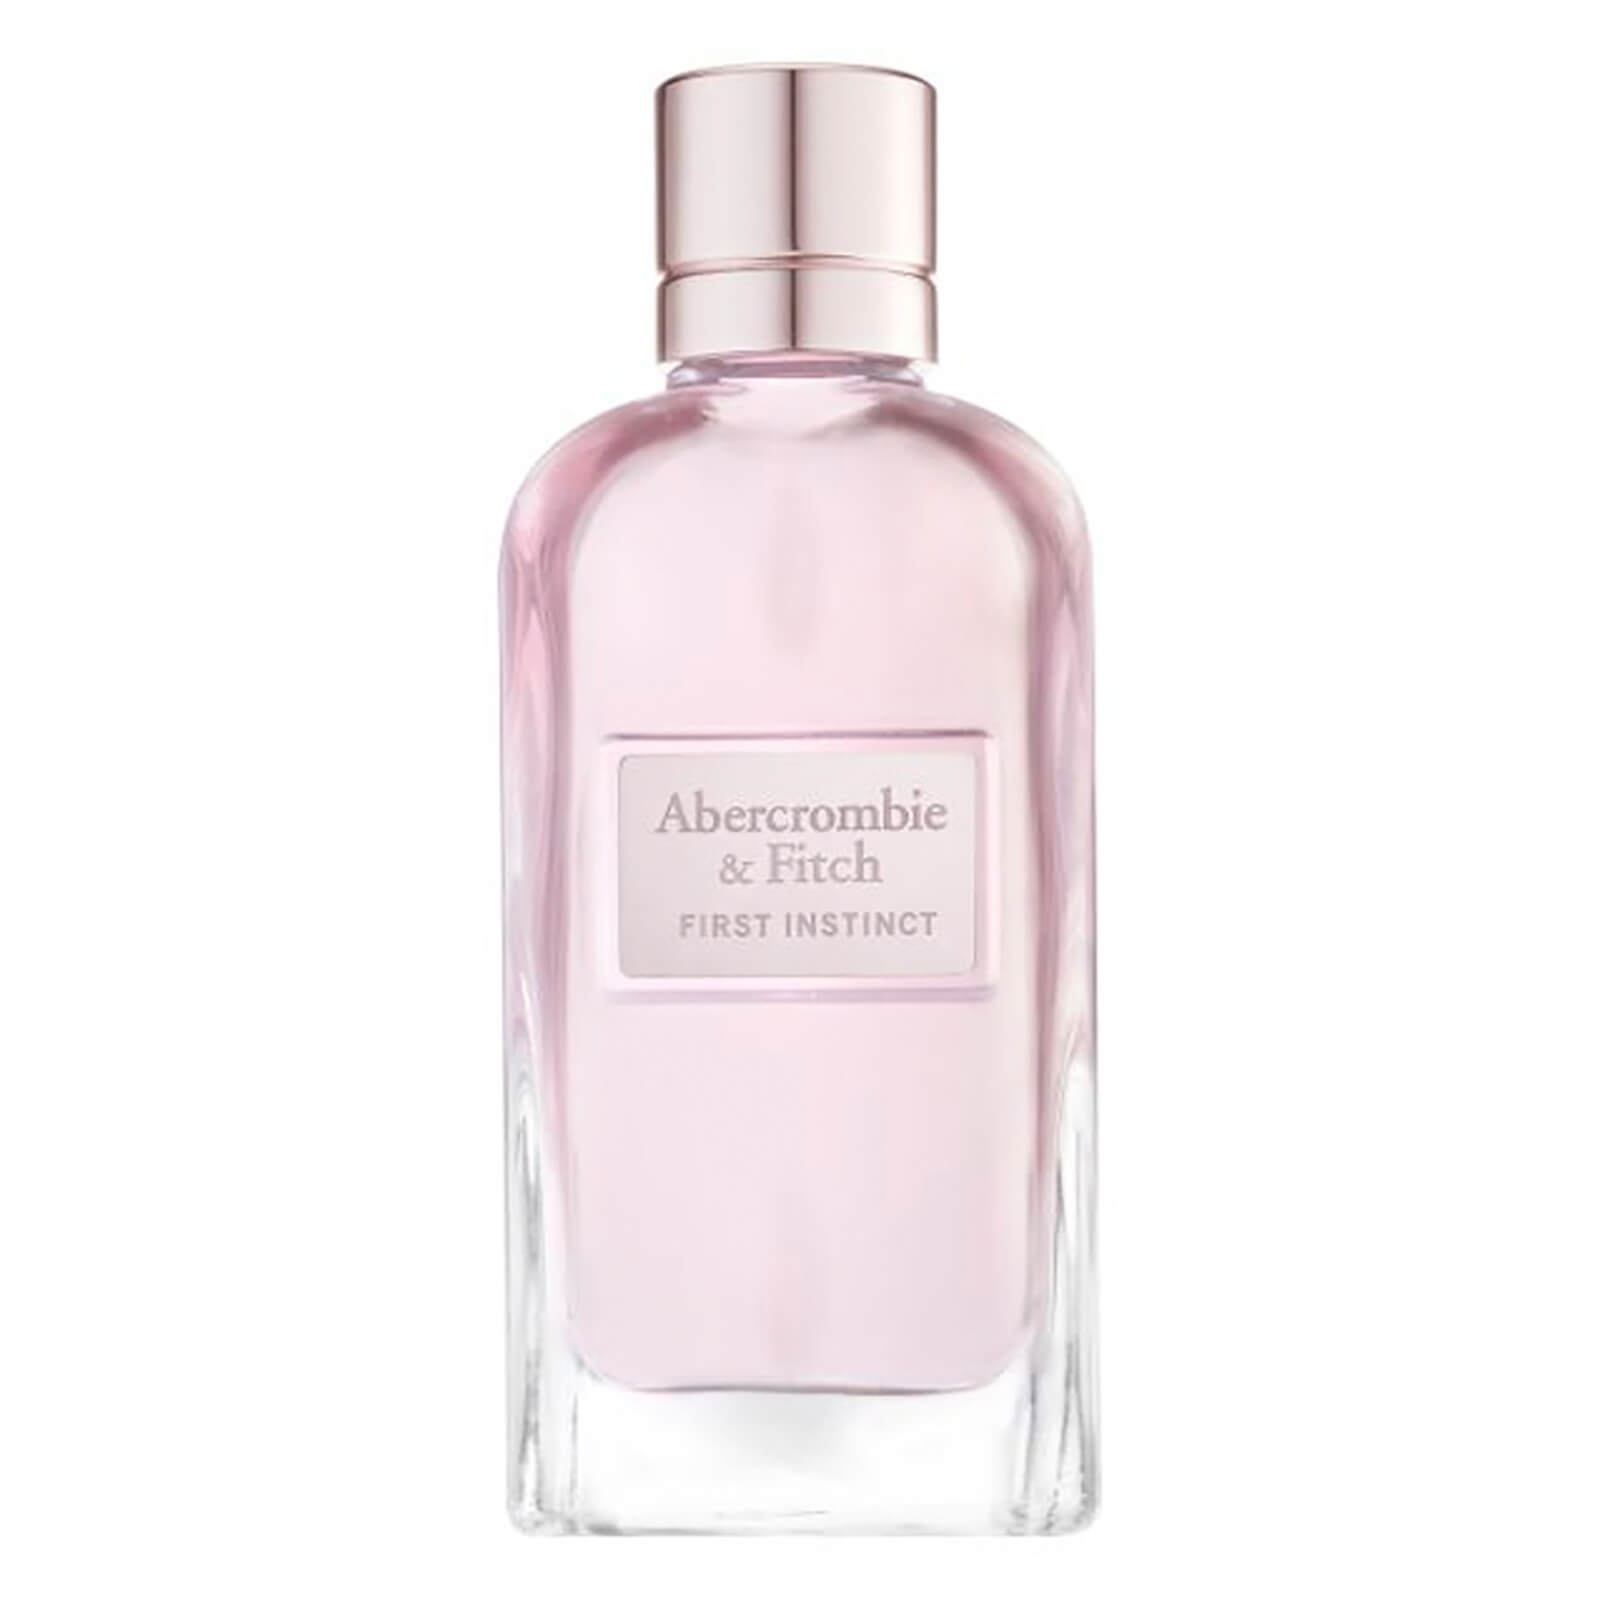 abercrombie and fitch first instinct sheer review